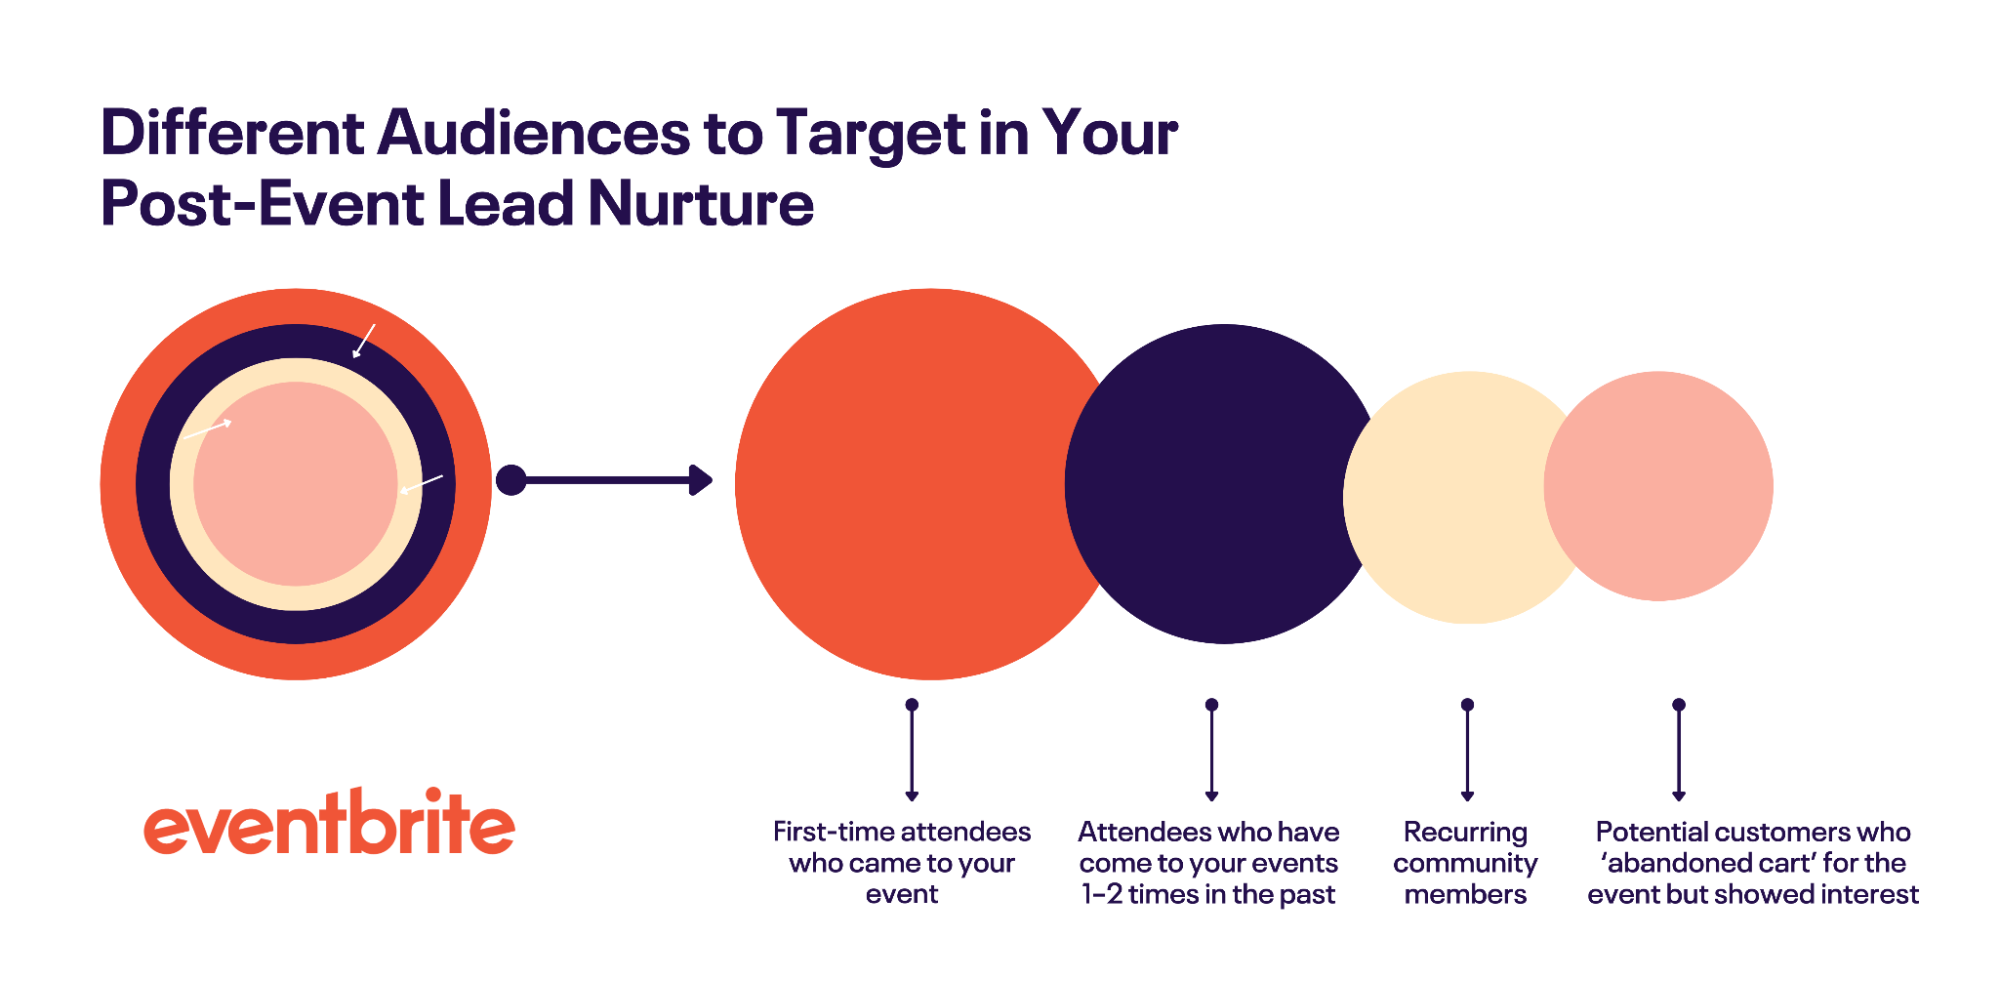 Different audiences to target in your post-event lead nurture